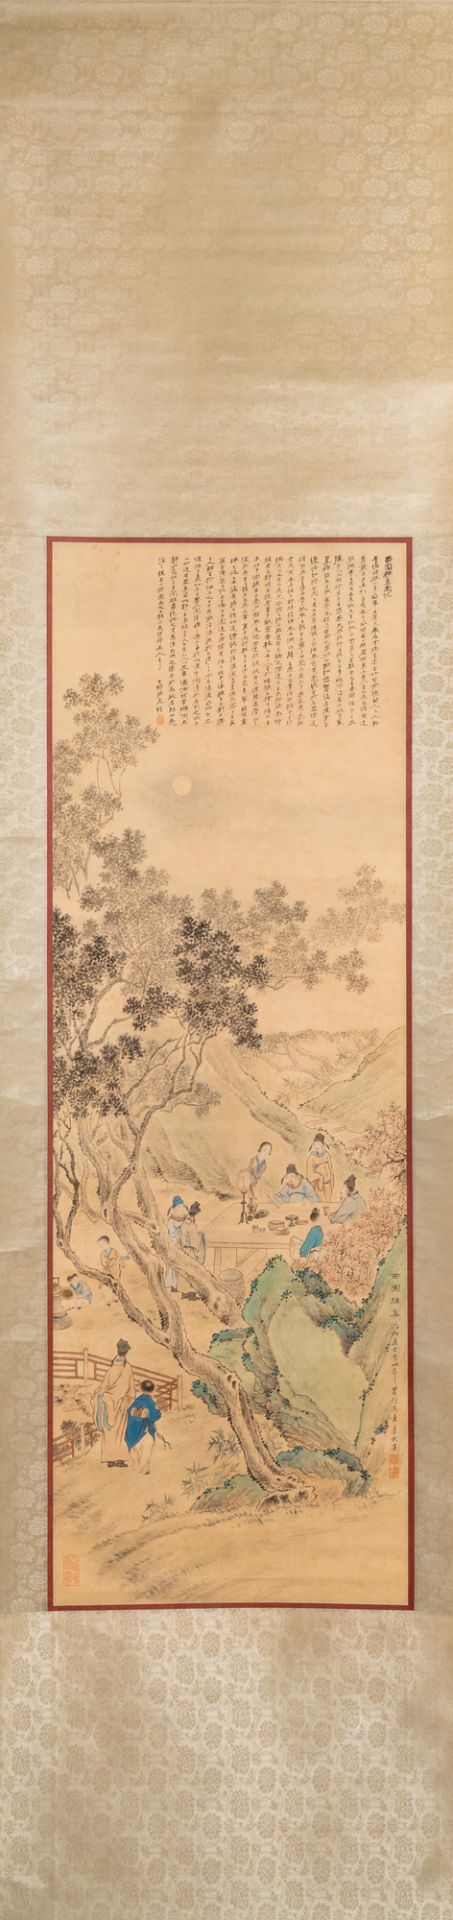 Li Qiujun (1899-1973): ÔScholars engaged in leisurely pursuitsÕ, ink and colour on paper - Image 3 of 17